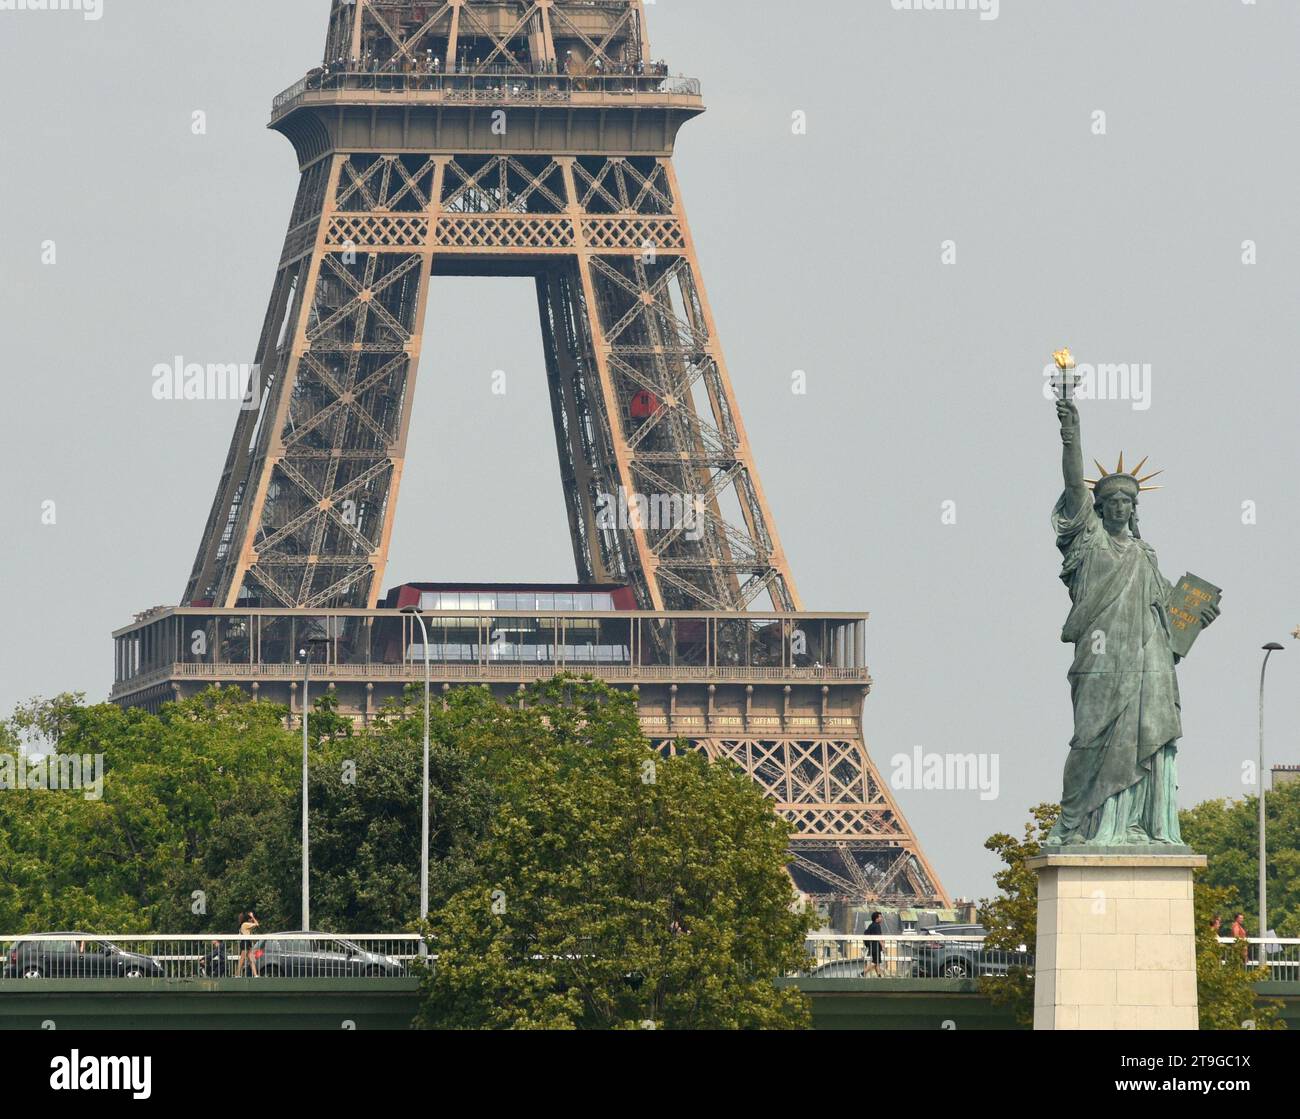 Paris, France - August 28, 2019: Statue of Liberty in Paris and Eiffel Tower at the background. Stock Photo